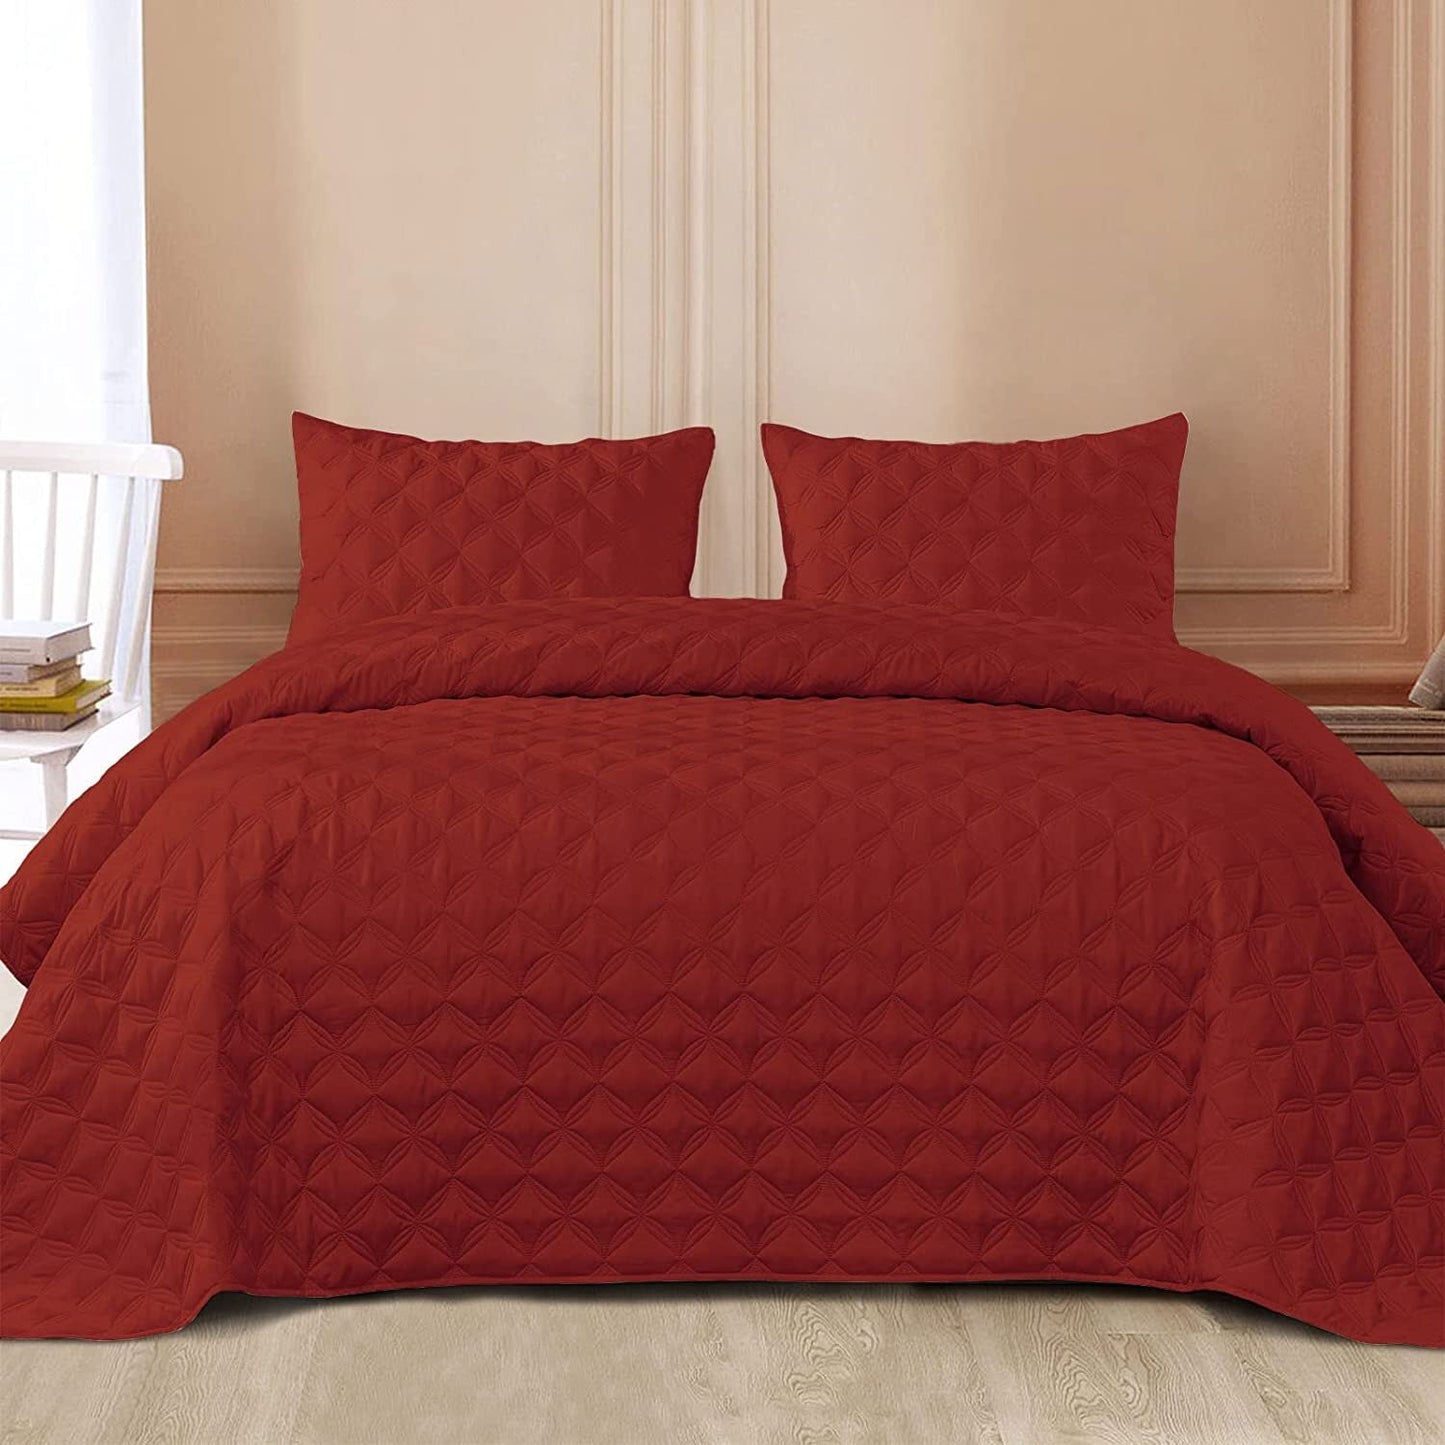 Exclusivo Mezcla Bed Quilt Set King Size for All Season, Stitched Pattern Quilted Bedspread/Bedding Set/Coverlet with 2 Pillow Shams, Lightweight and Soft, Red